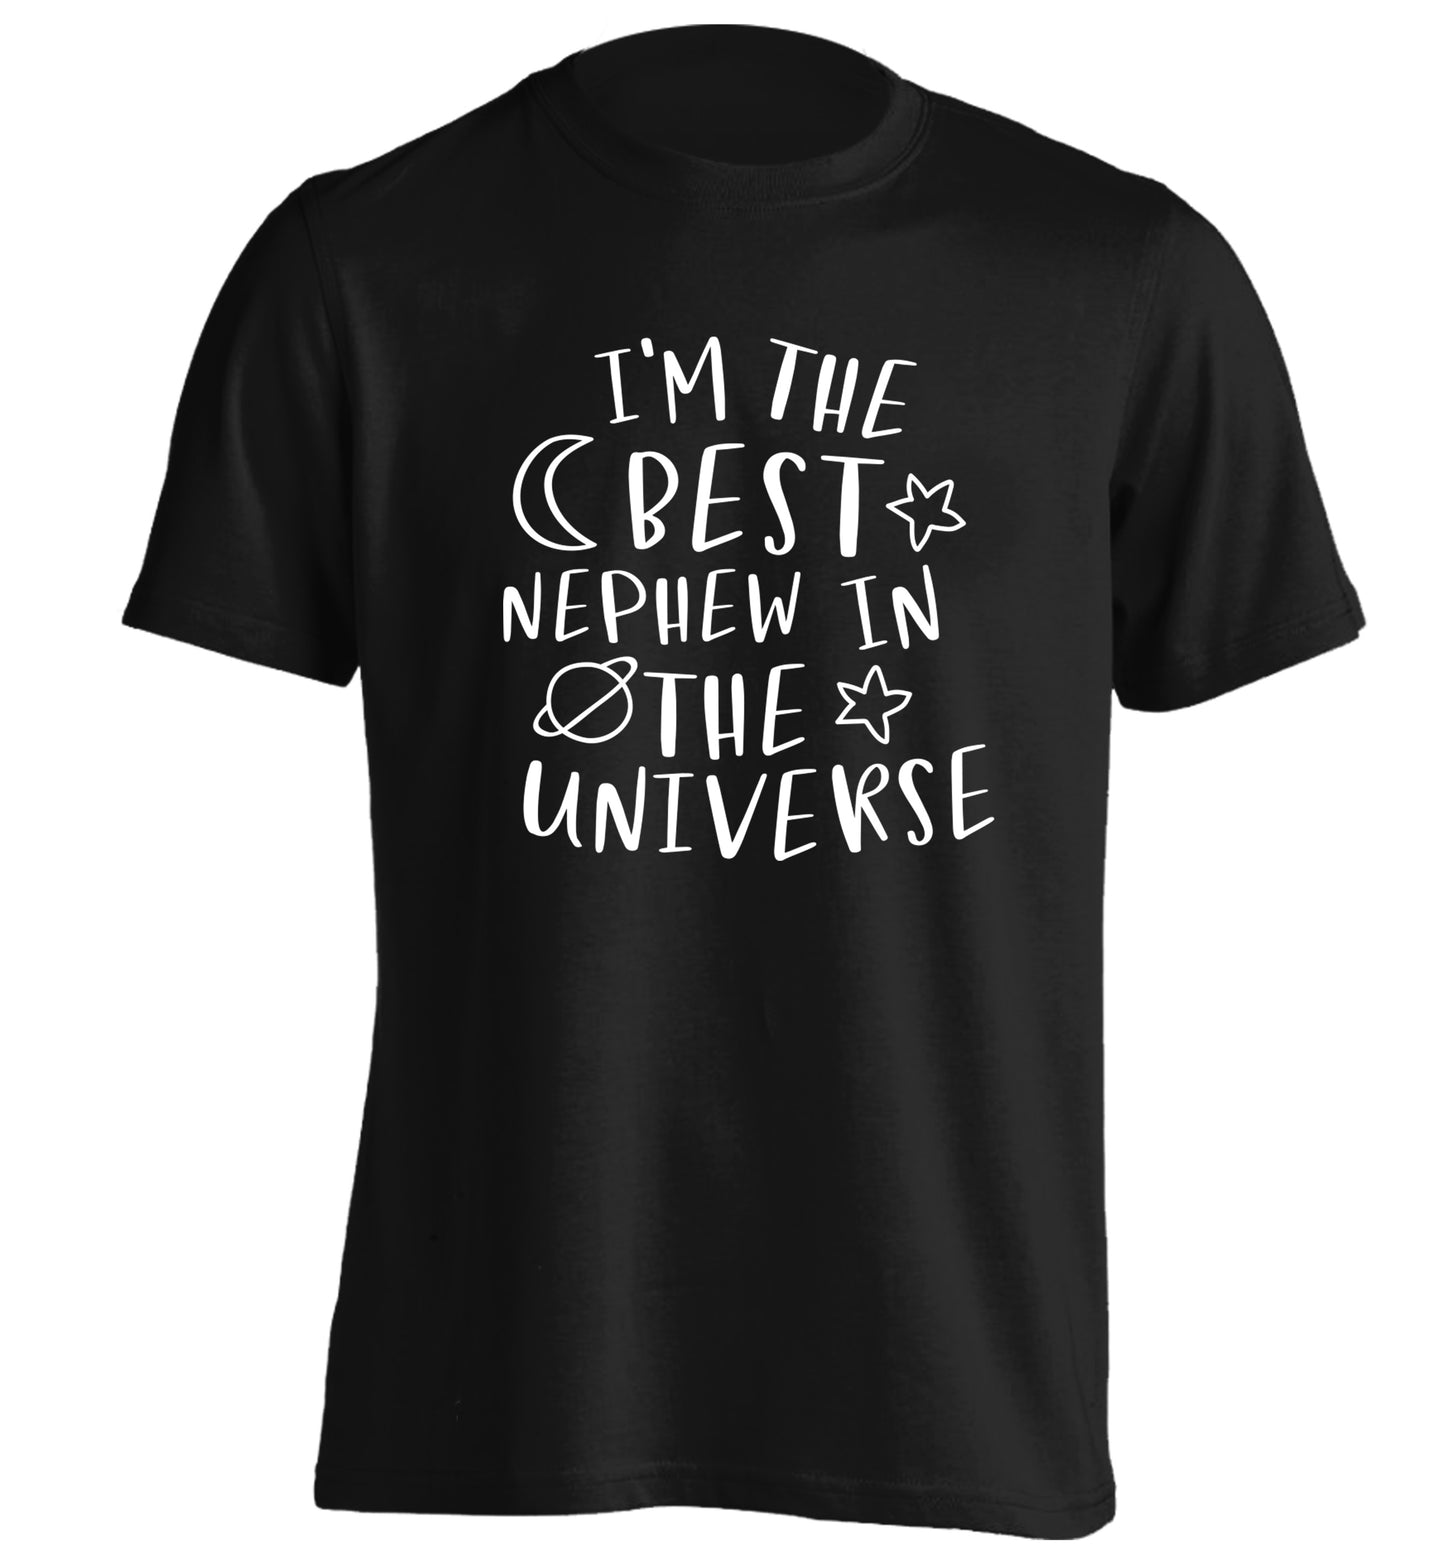 I'm the best nephew in the universe adults unisex black Tshirt 2XL